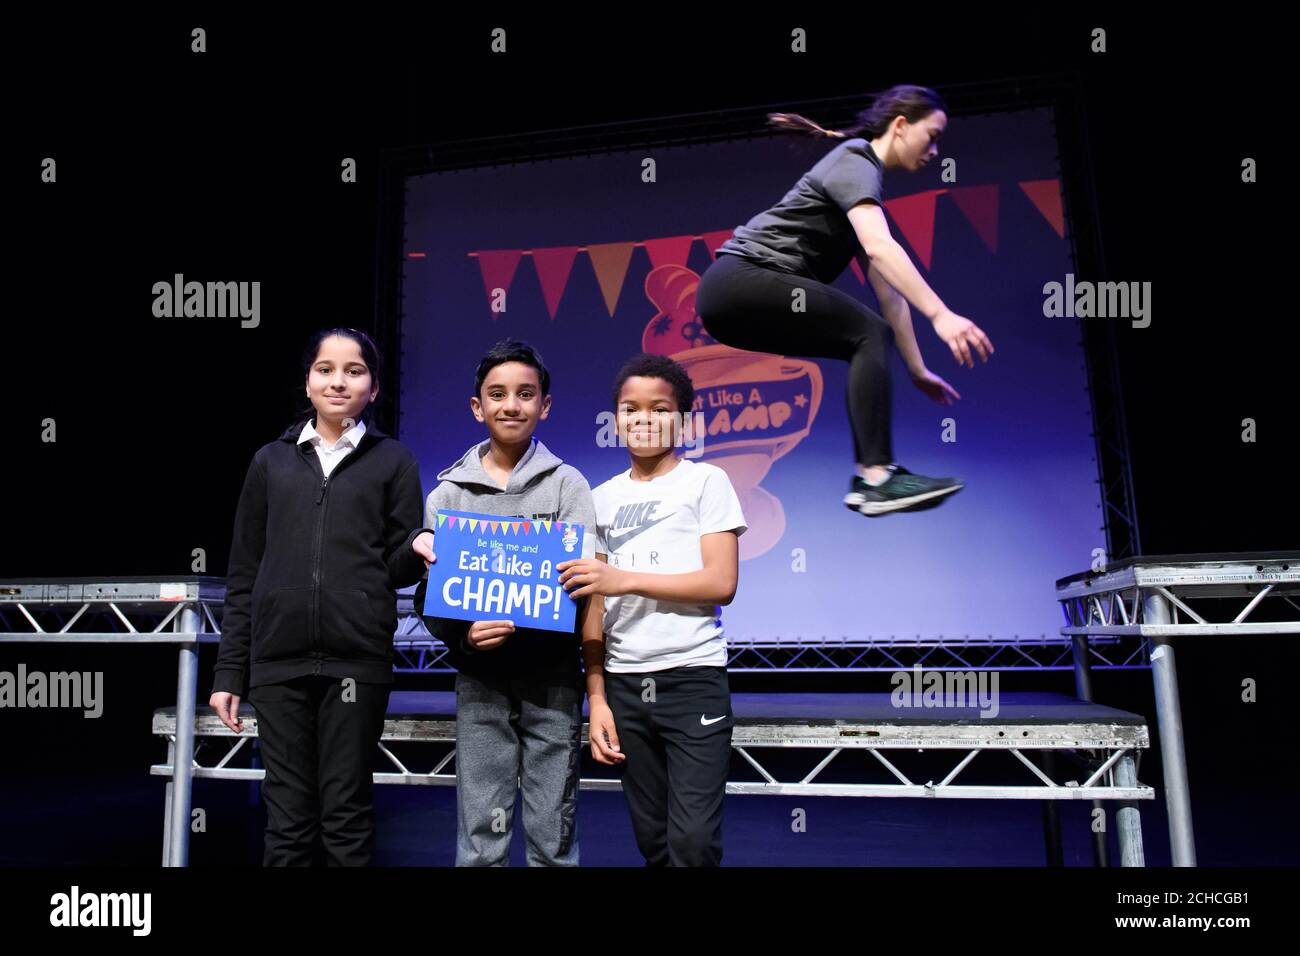 Jennifer Wilson from Parkour Generations' performs with pupils from Sheringham Primary School in Newham at the Eat Like A Champ showcase, a free healthy eating education programme supported by Danone, which aims to promote good nutrition and lifestyle, at Stratford Circus Arts Centre in London. Stock Photo